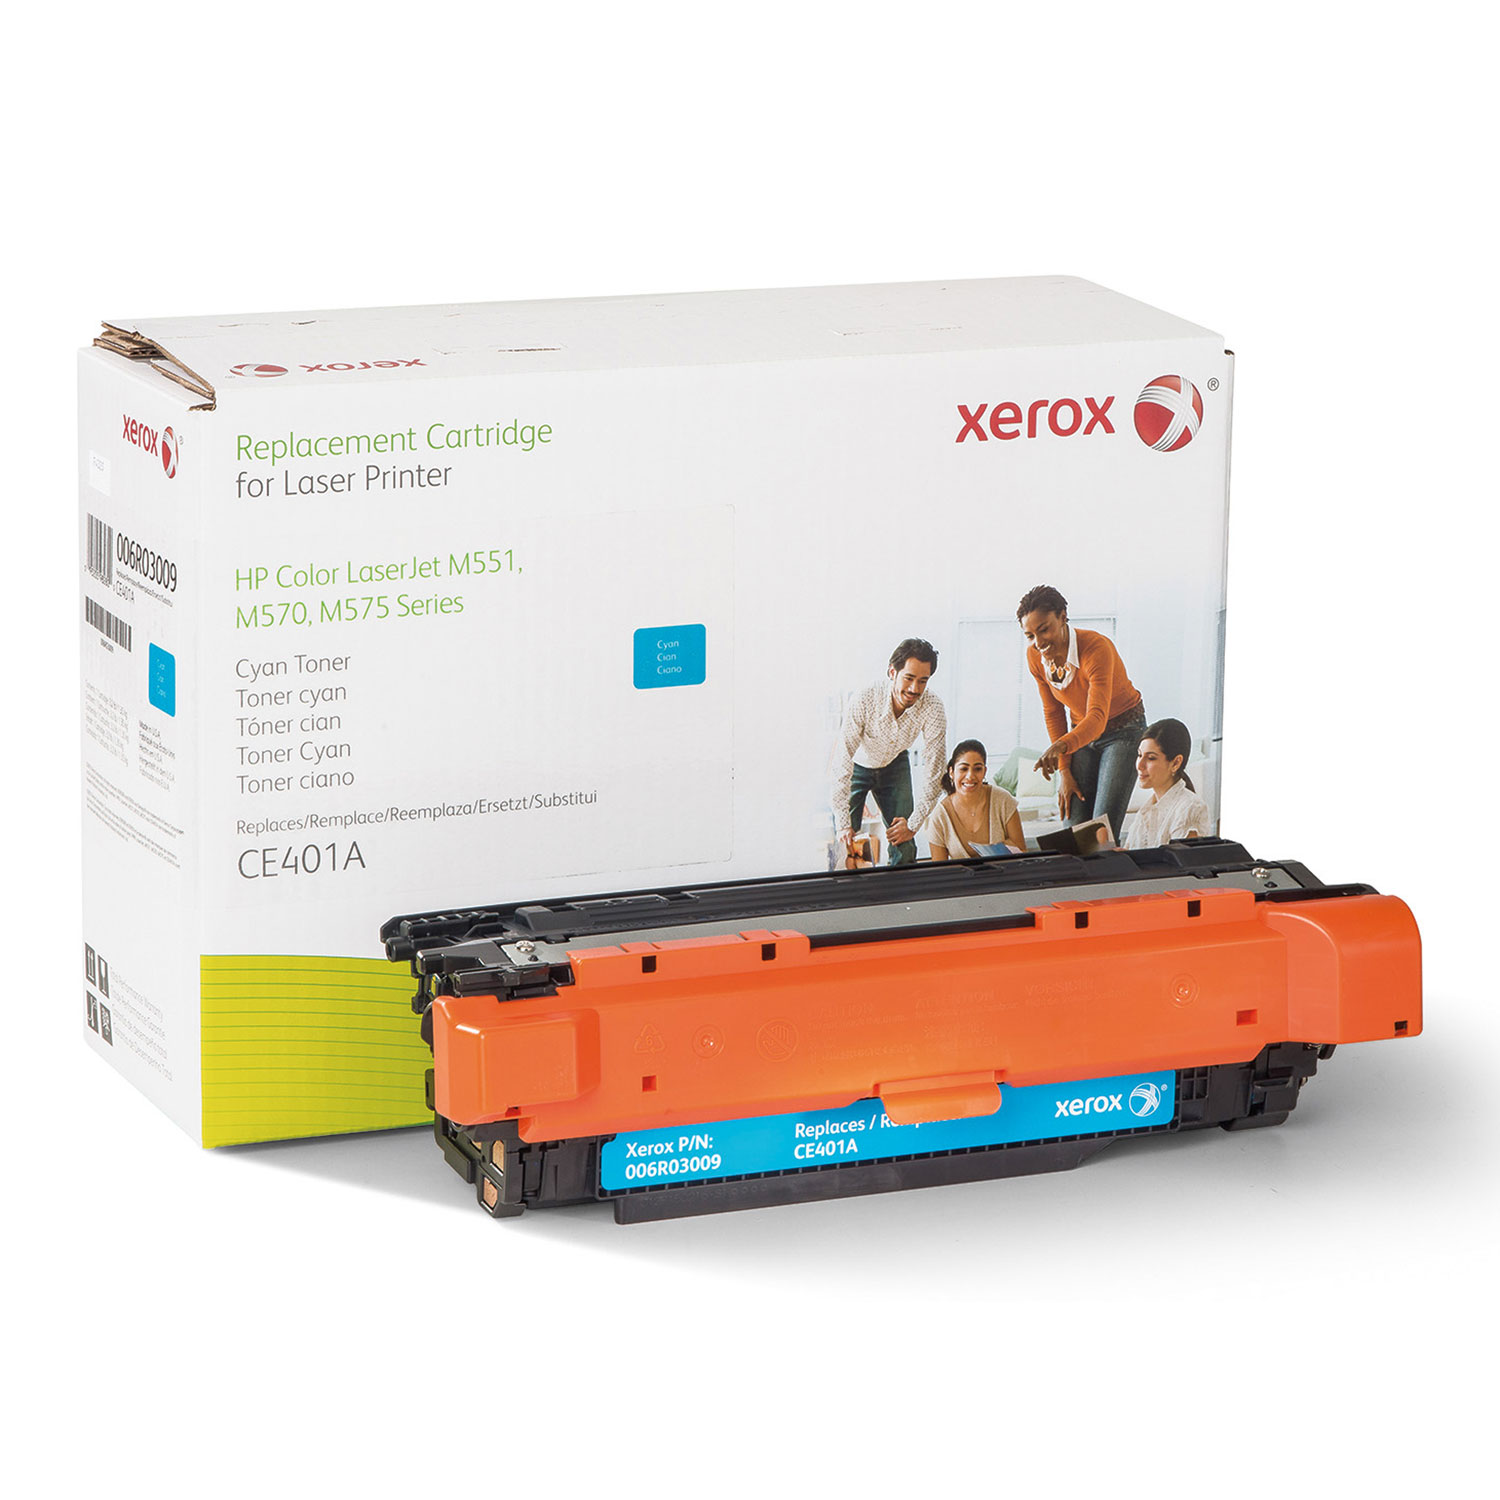  Xerox 006R03009 006R03009 Replacement Toner for CE401A (507A), Cyan (XER006R03009) 